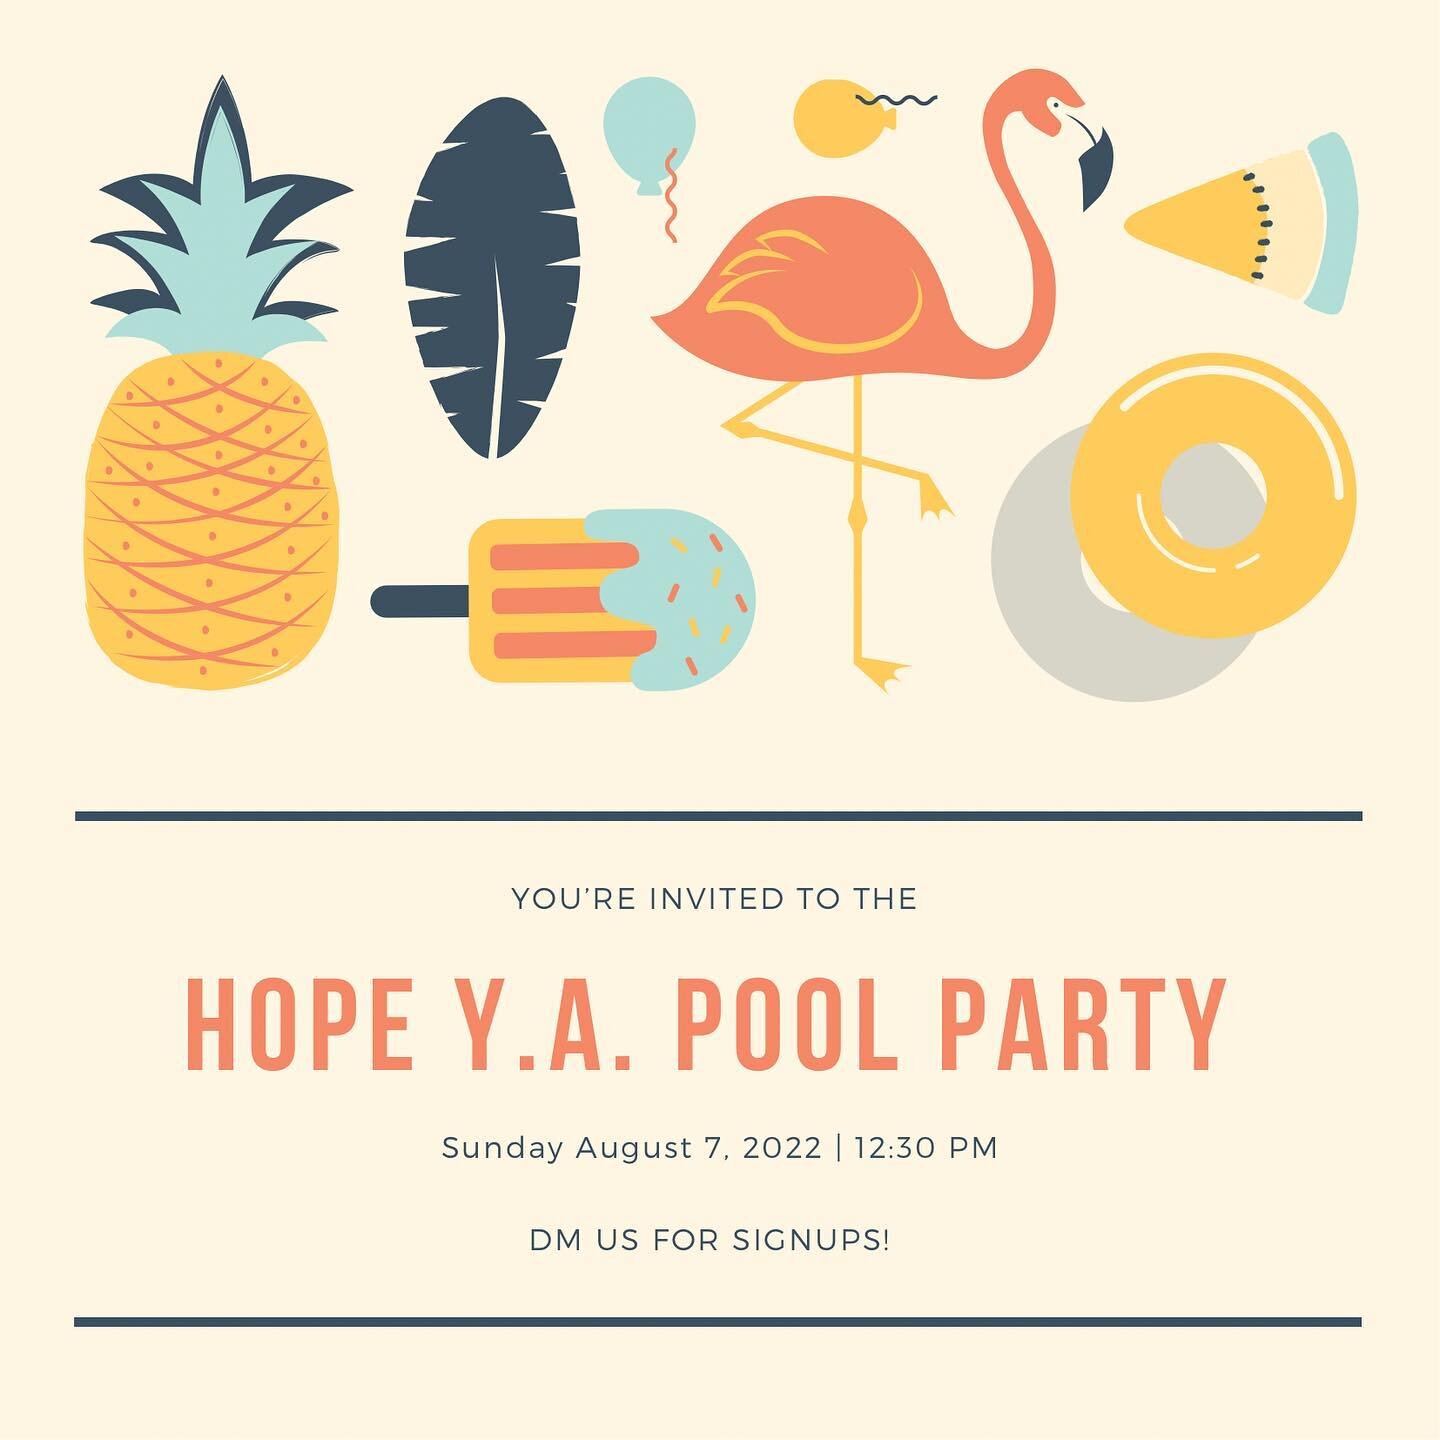 SUNDAY FUNDAY! 
Don&rsquo;t miss out on the Pool Party this Sunday August 7th at 12:30pm! It will be Potluck Style DM us for more details! ☀️ #poolparty #summer #summervibes #dontmissout #hope